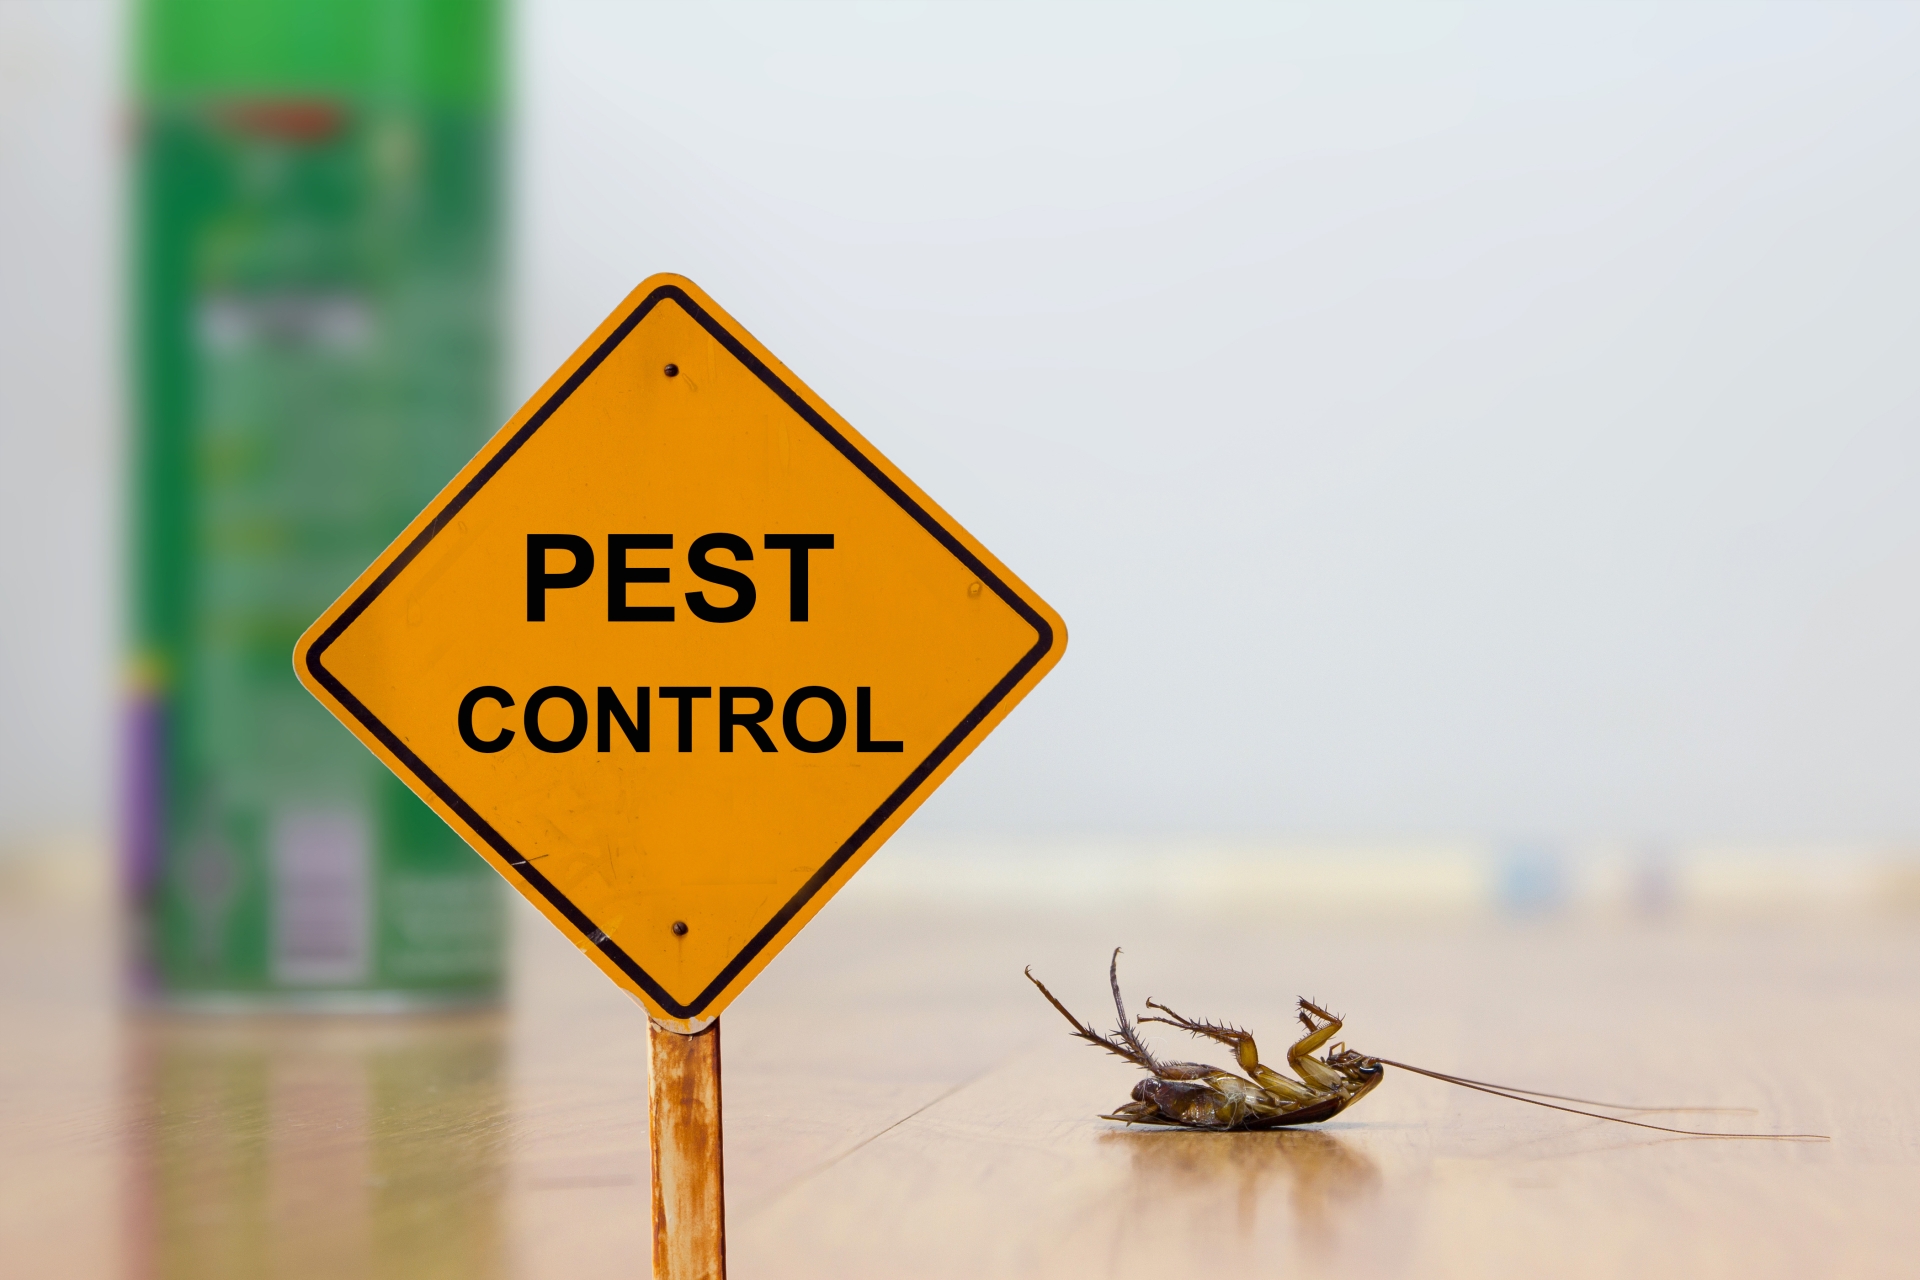 24 Hour Pest Control, Pest Control in Holborn, Strand, Covent Garden, WC2. Call Now 020 8166 9746